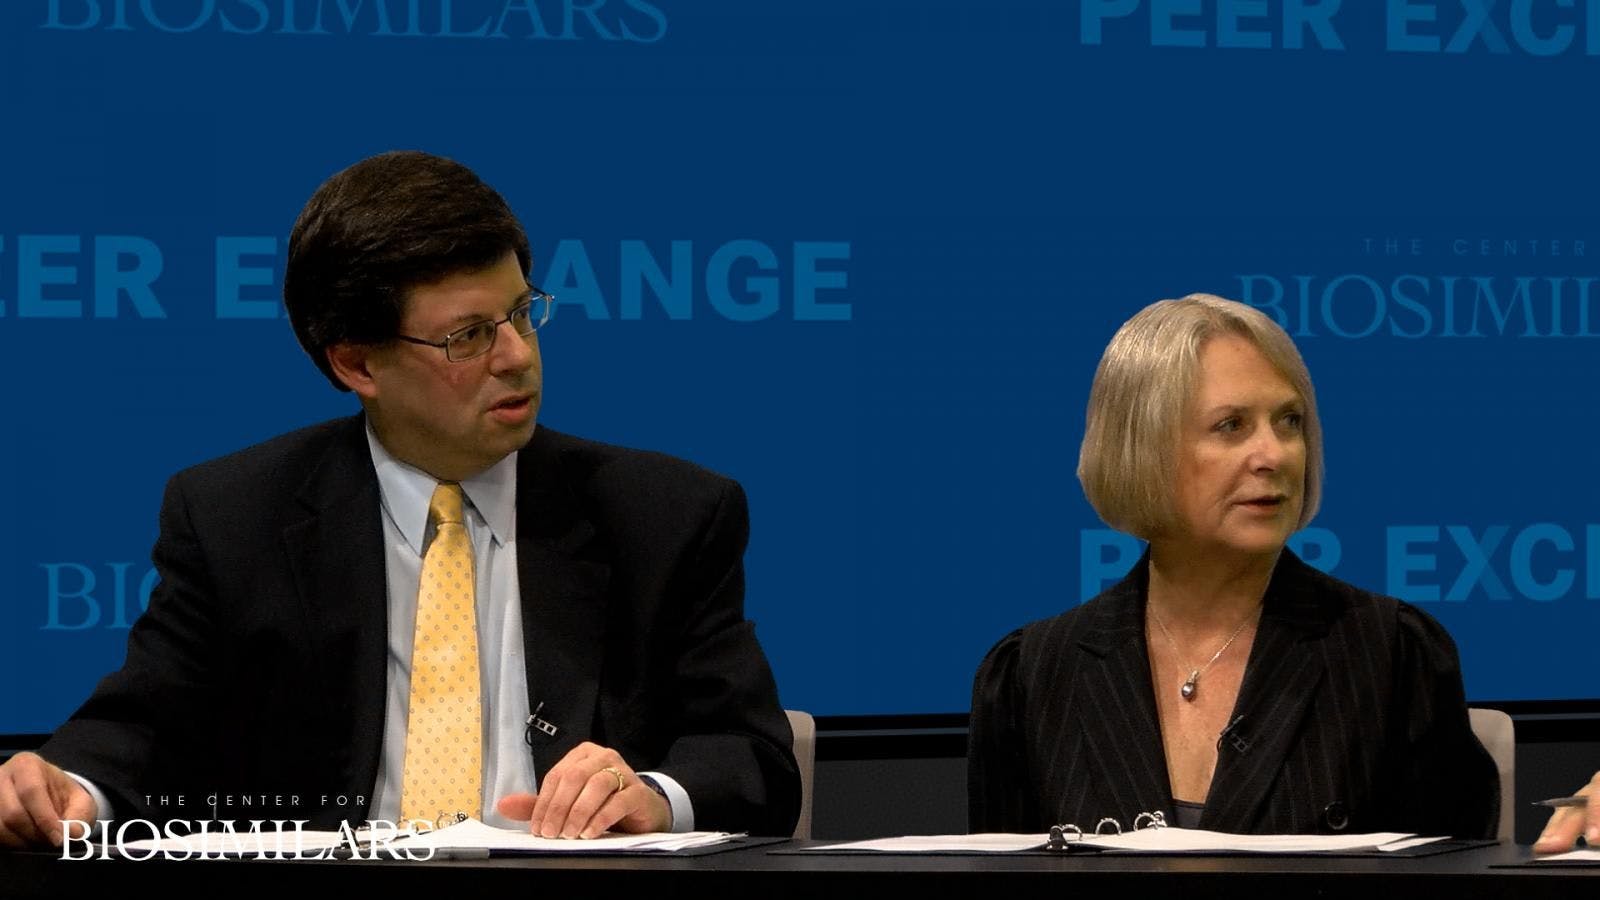 Challenges in Discussing Biosimilars With Patients